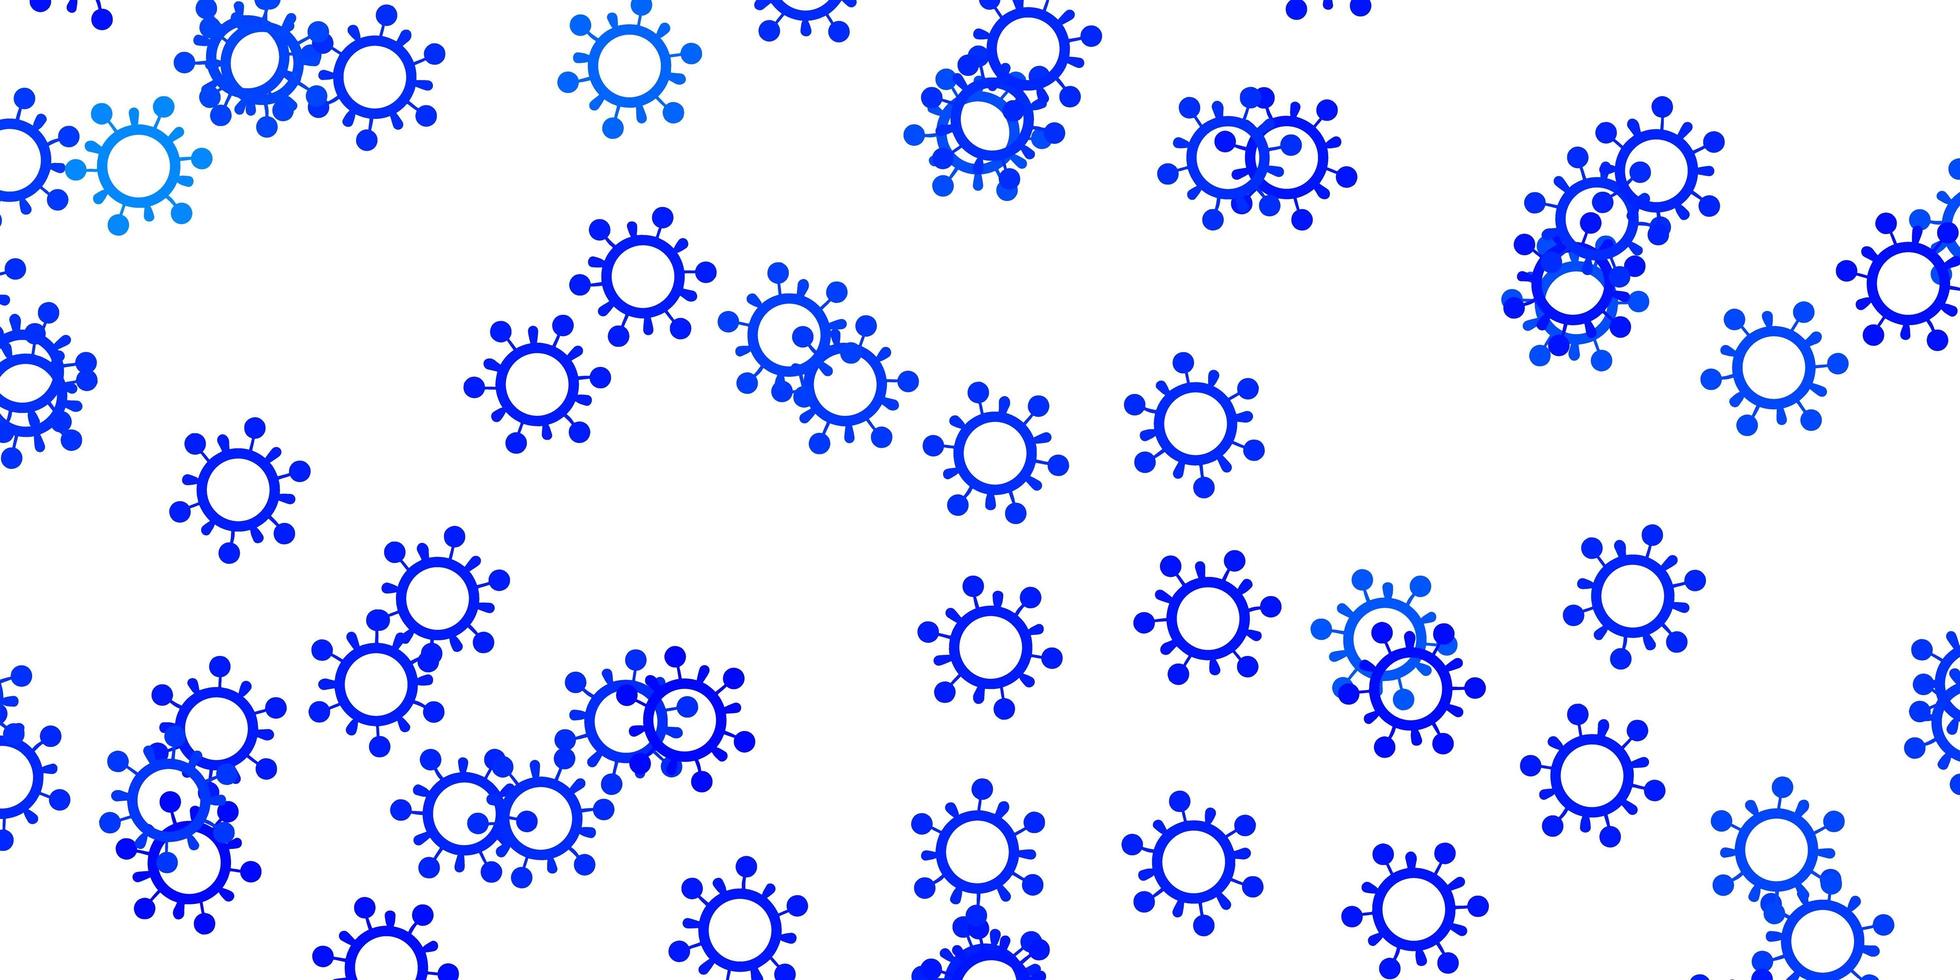 Light blue vector background with covid19 symbols